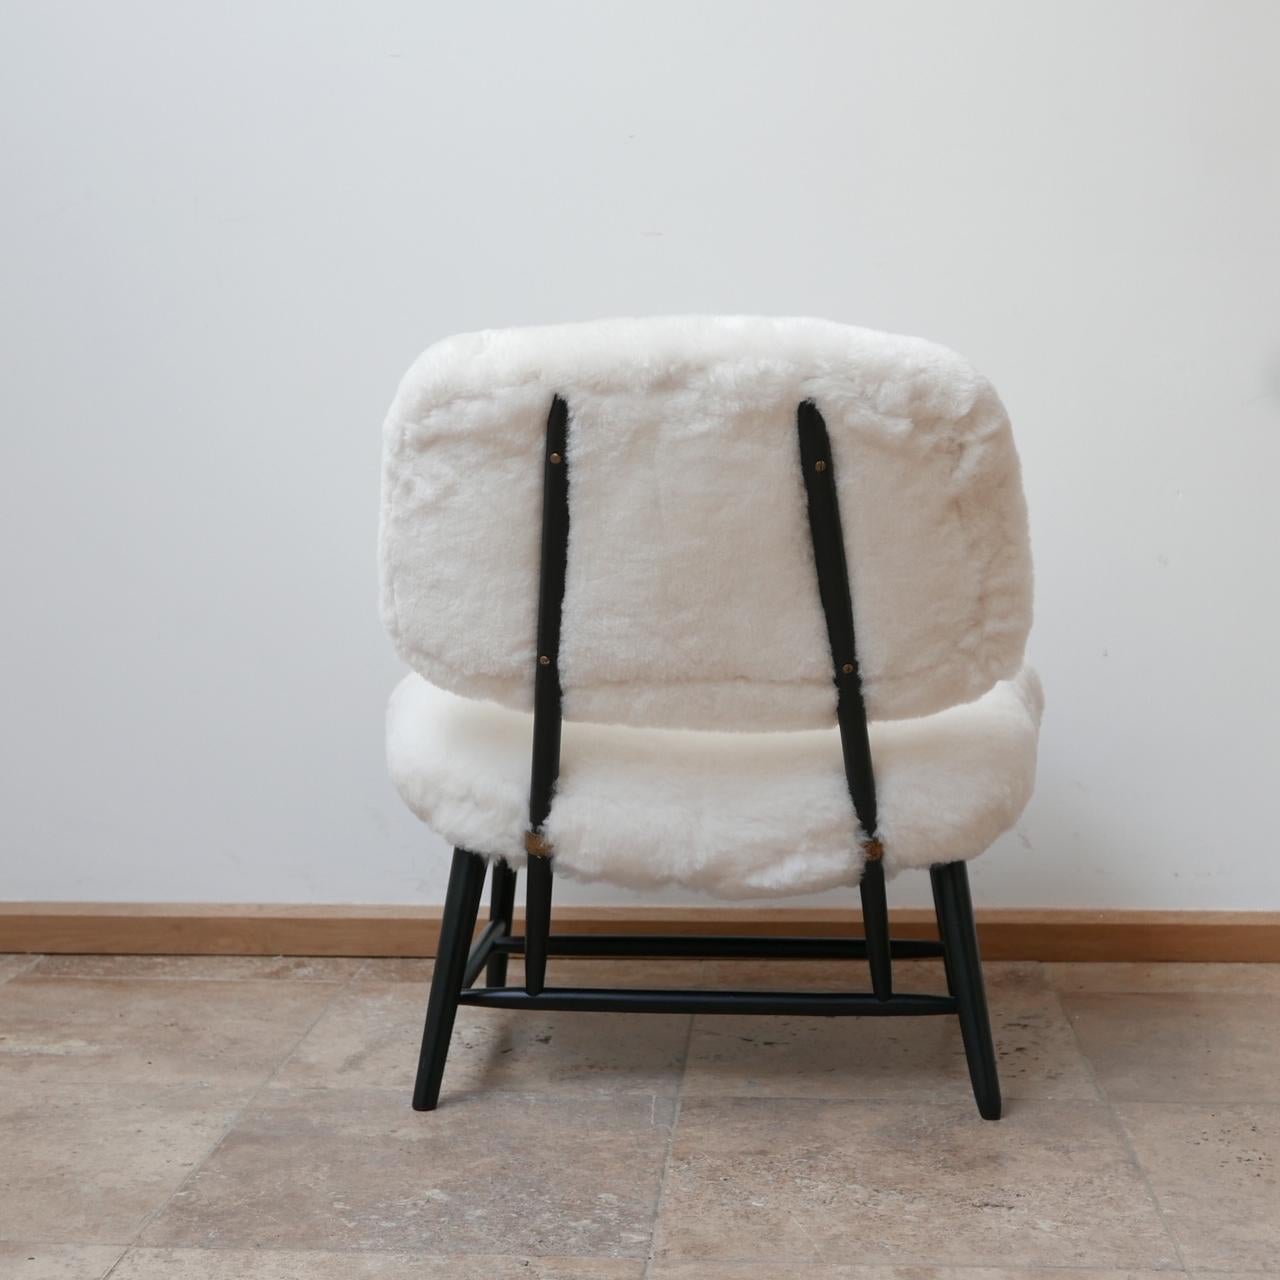 Pair of Alf Svensson 'TeVe' Sheepskin Shearling Lounge Chairs For Sale 3